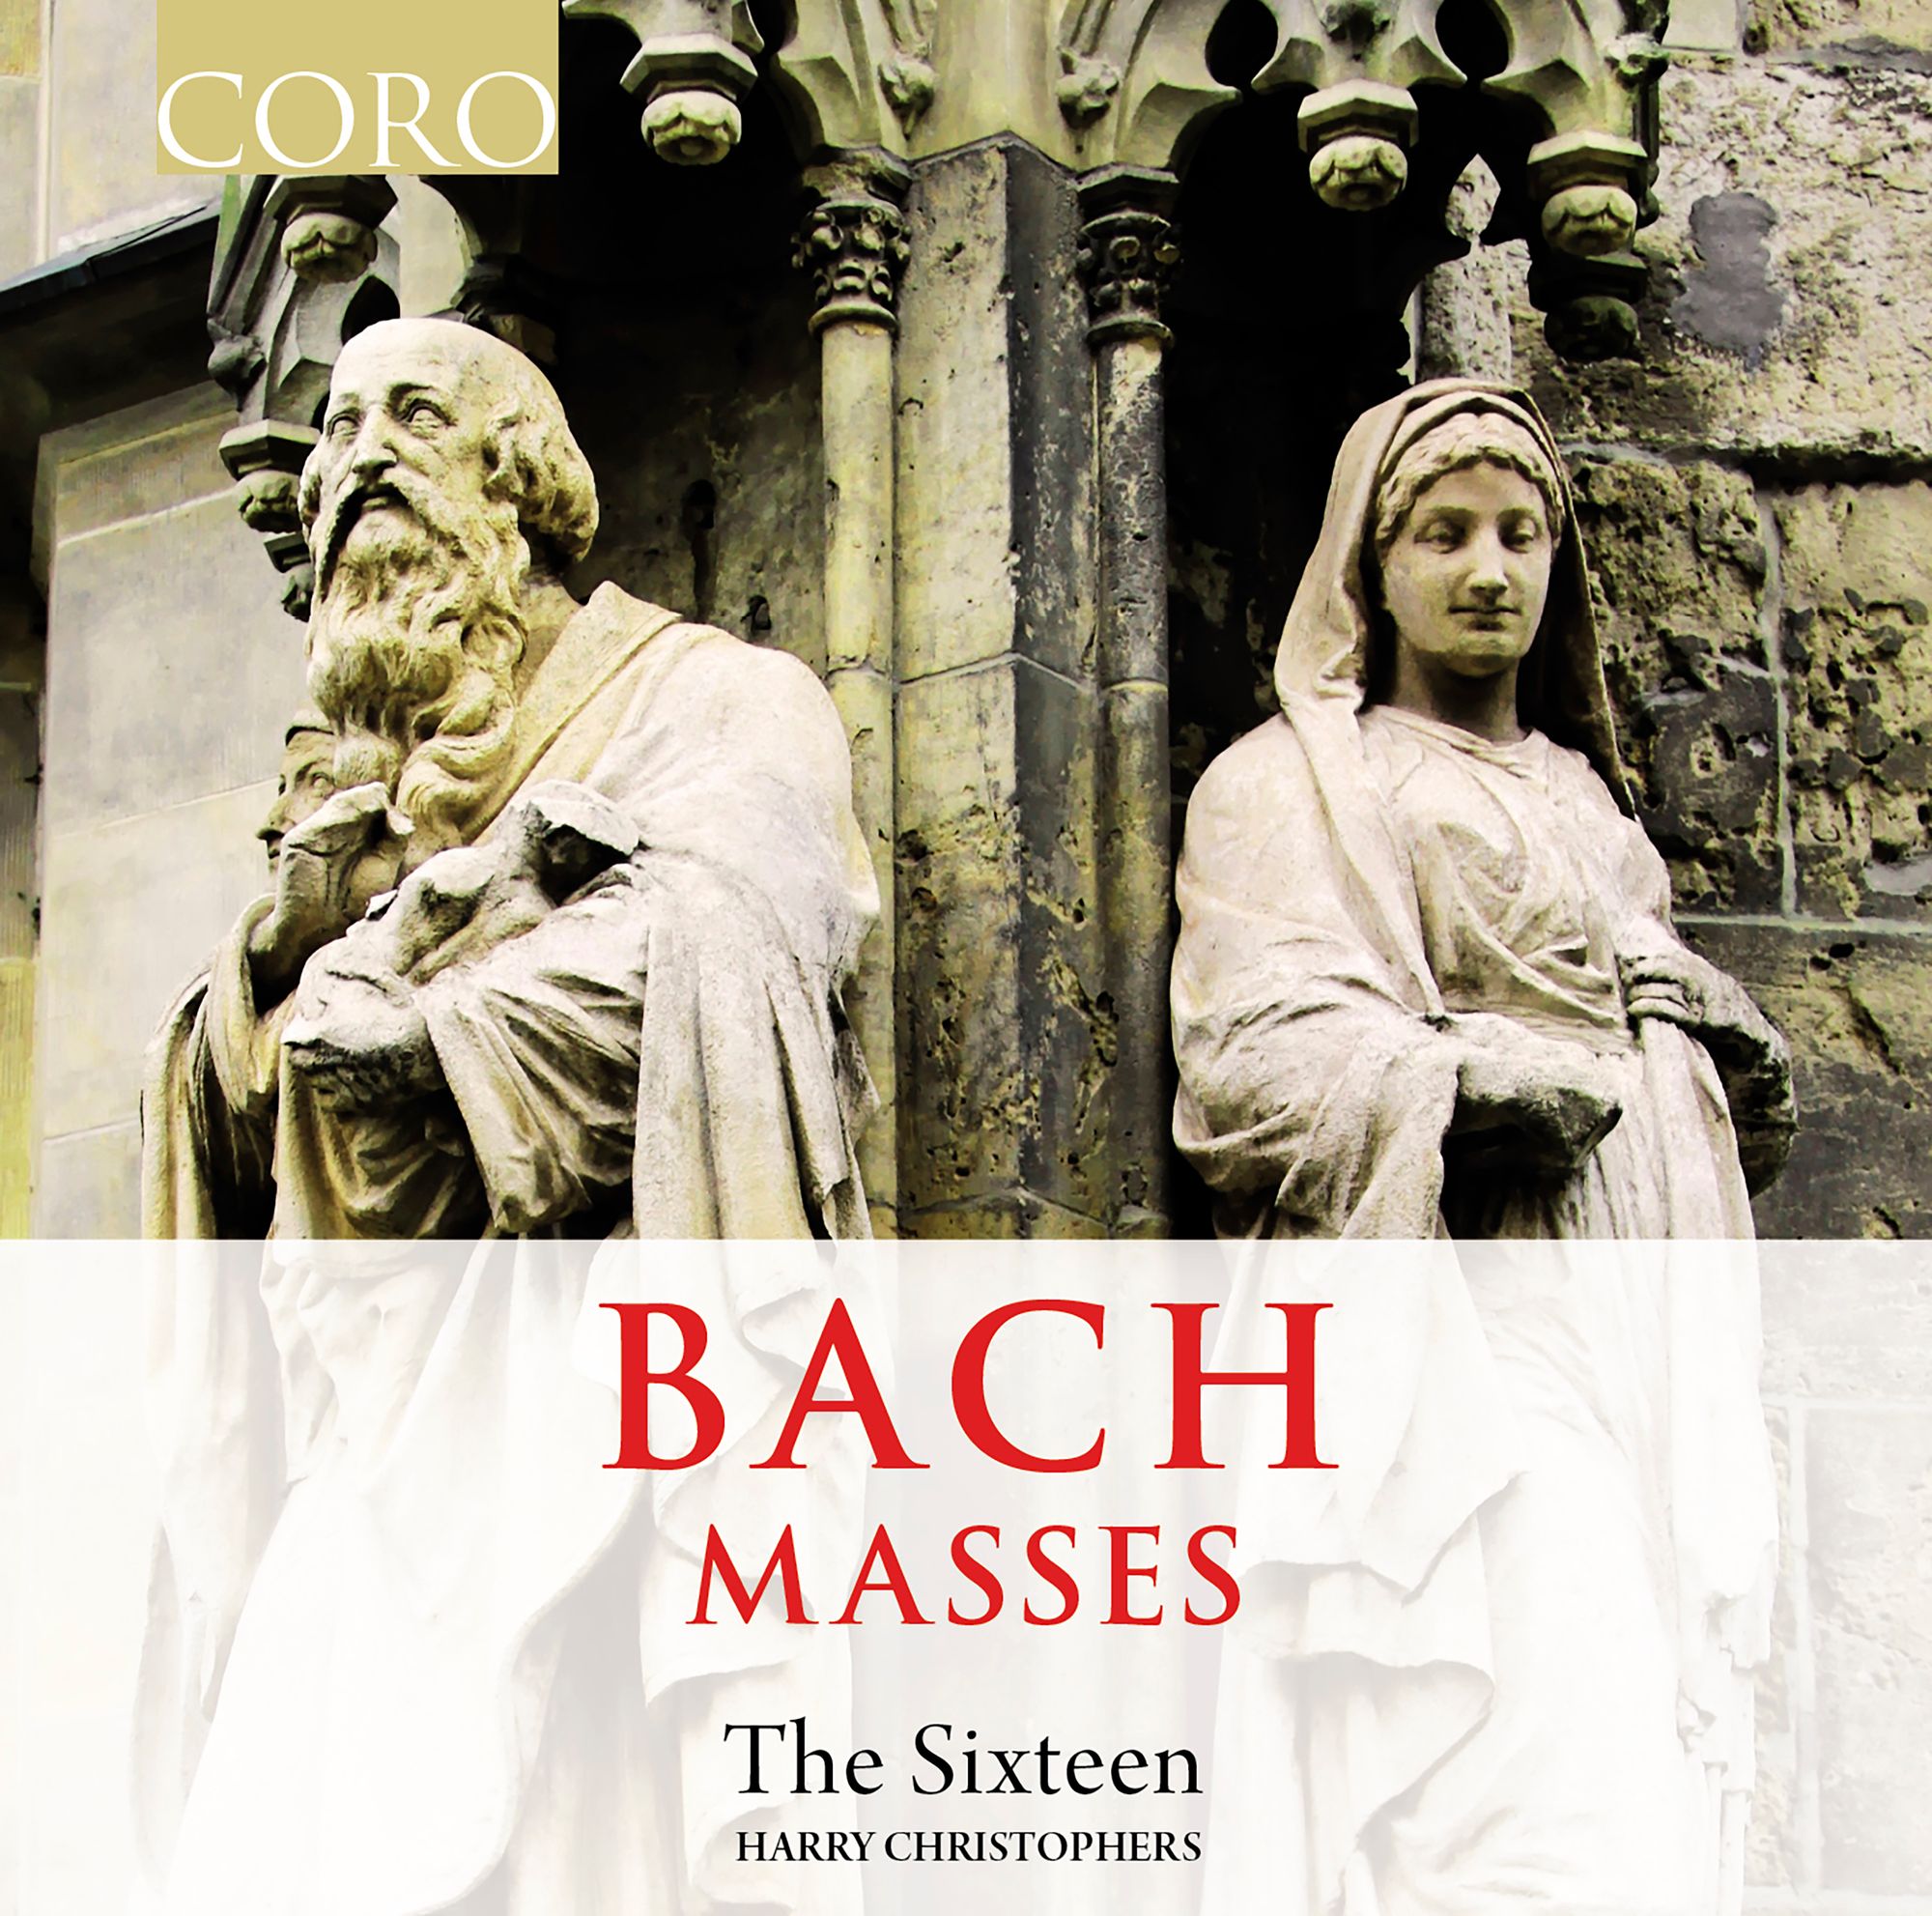 Bach Masses, together at last: The Sixteen